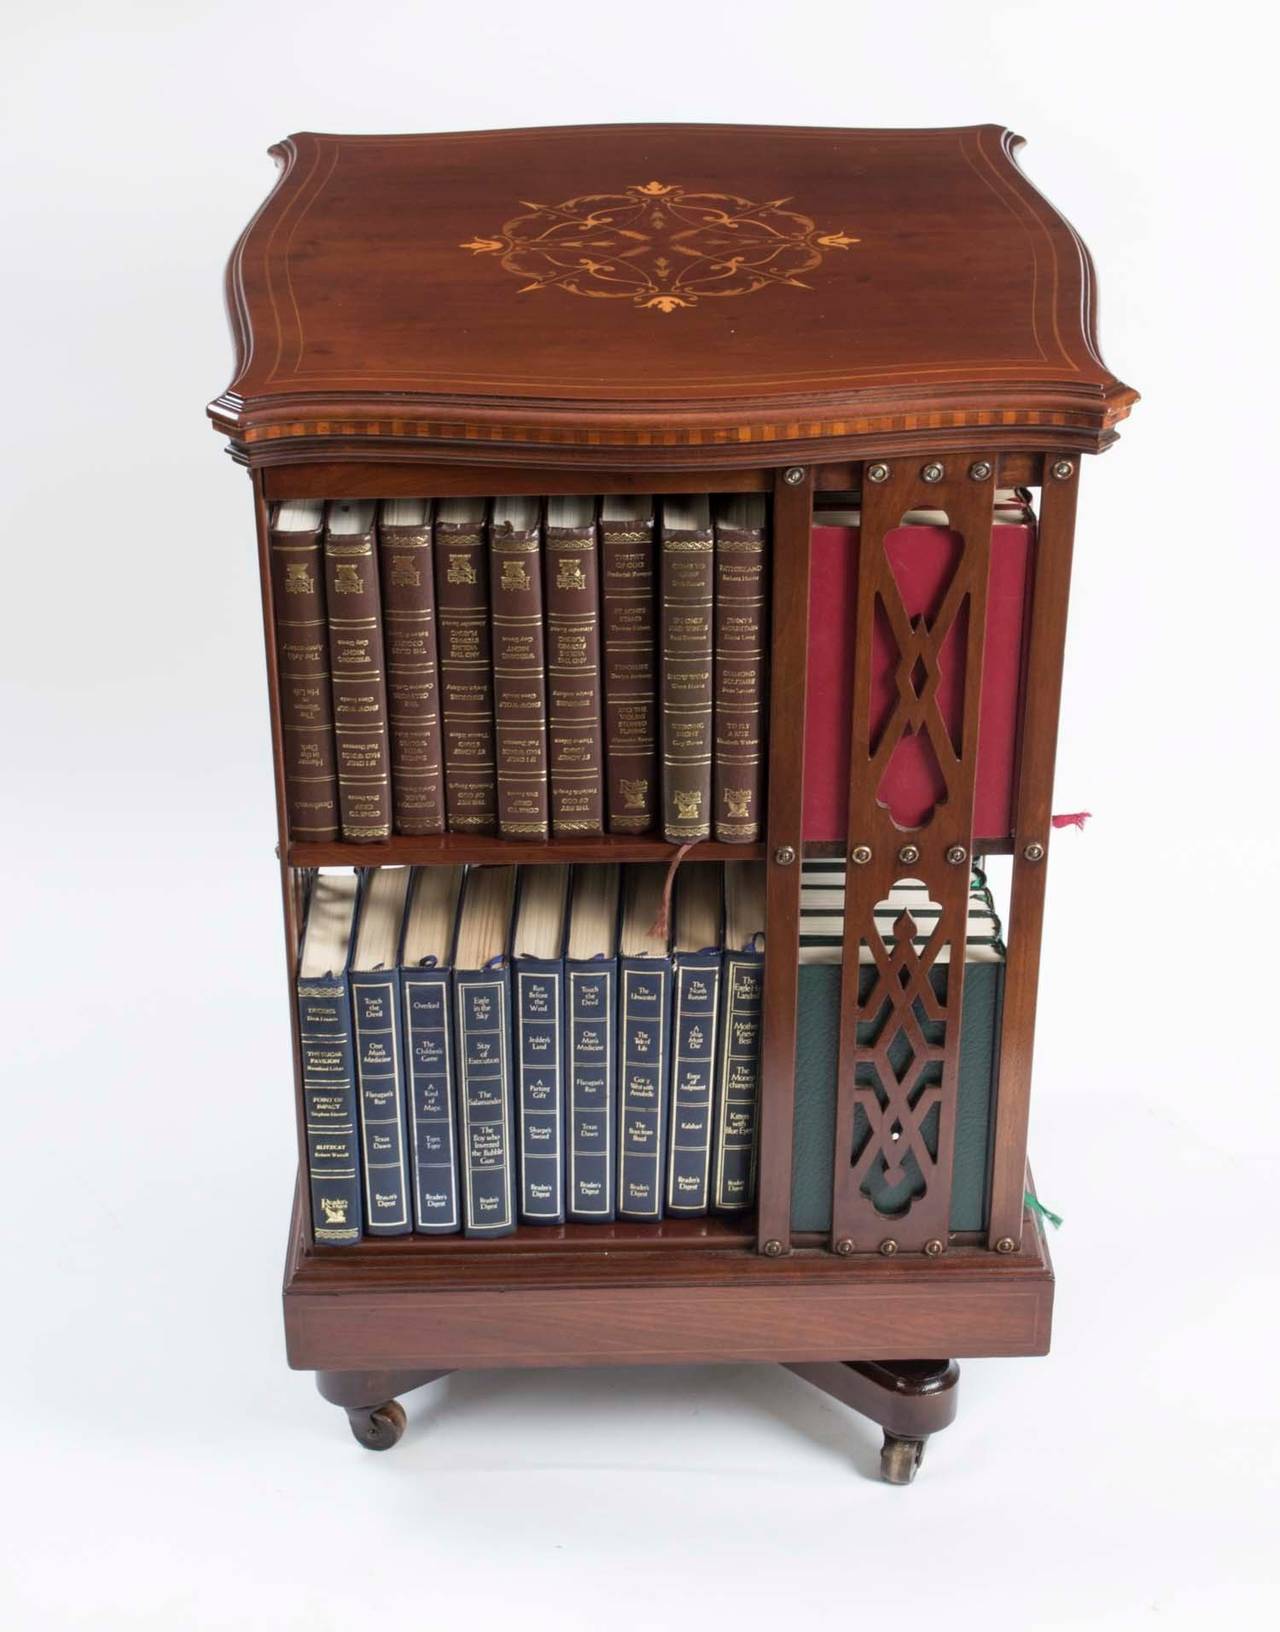 This is an English antique mahogany revolving bookcase circa 1900 in date, attributed to the renowned manufacturer and retailer Maple & Co. 

The bookcase has inlaid boxwood lines to the top and bottom. The top has an elaborate fruitwood inlay to